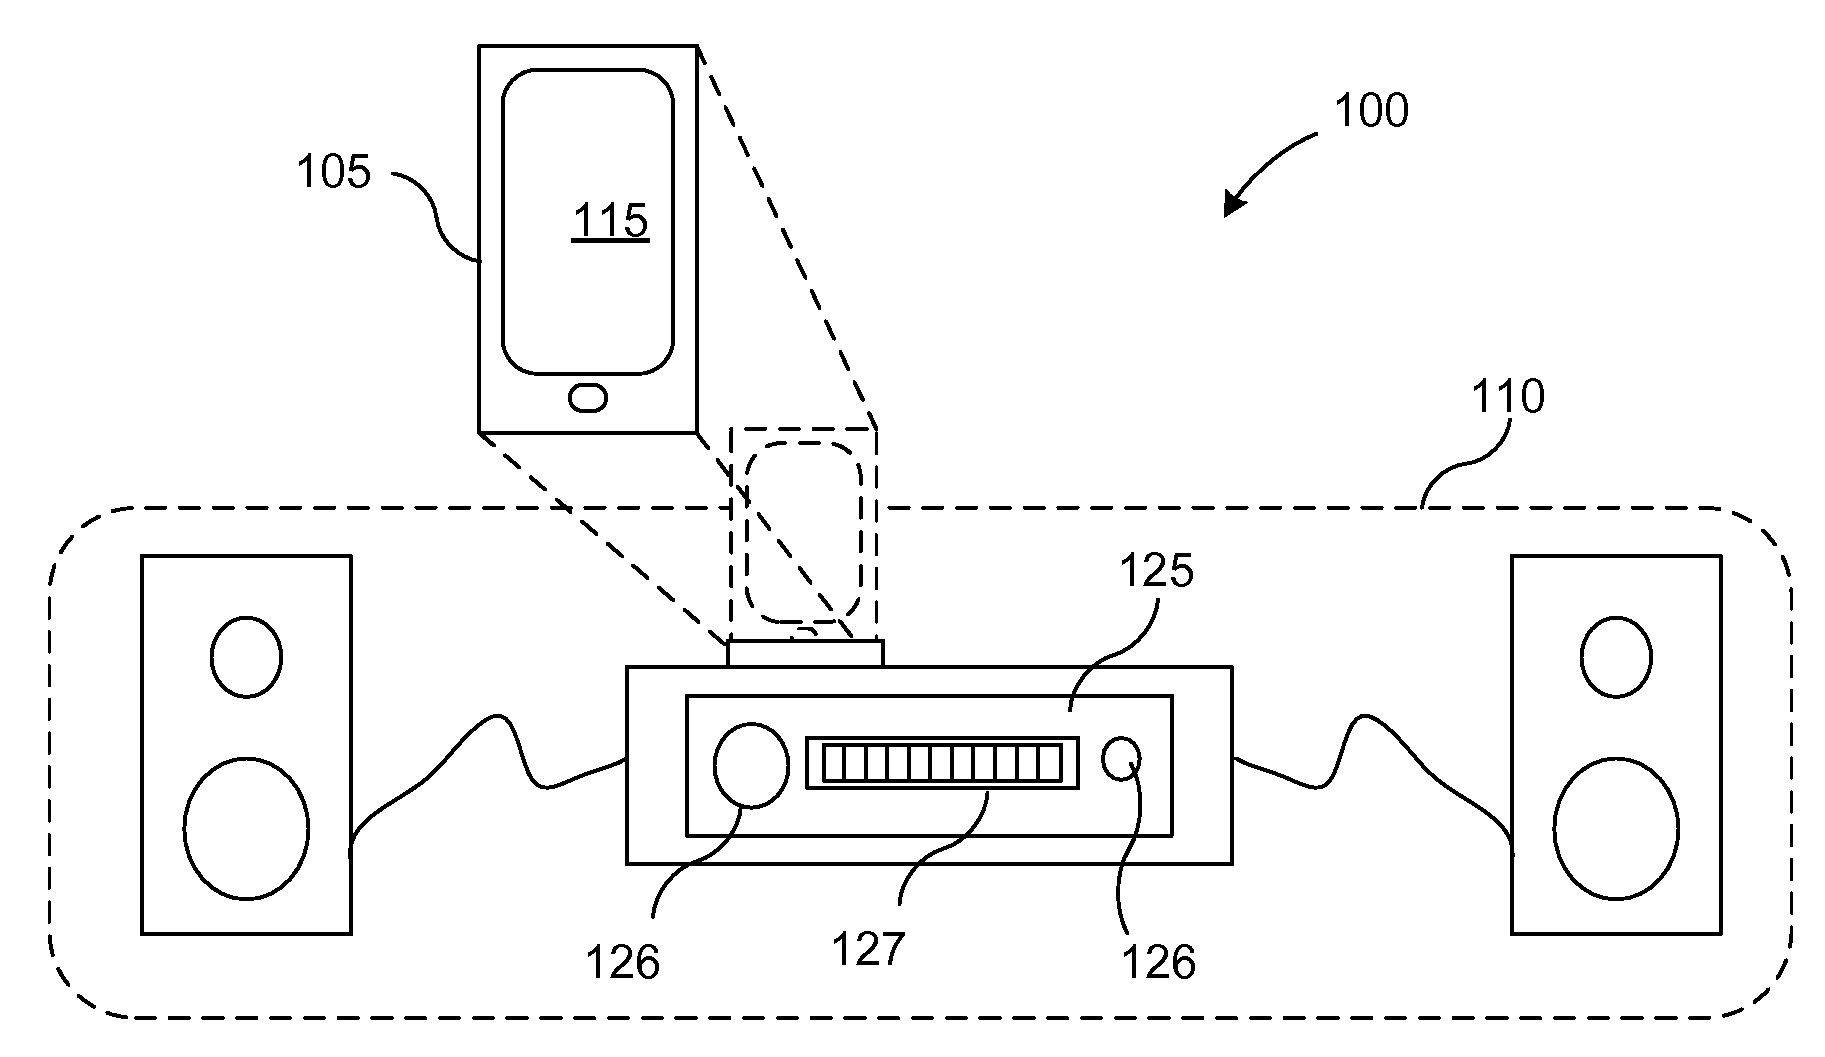 Protocol for remote user interface for portable media device